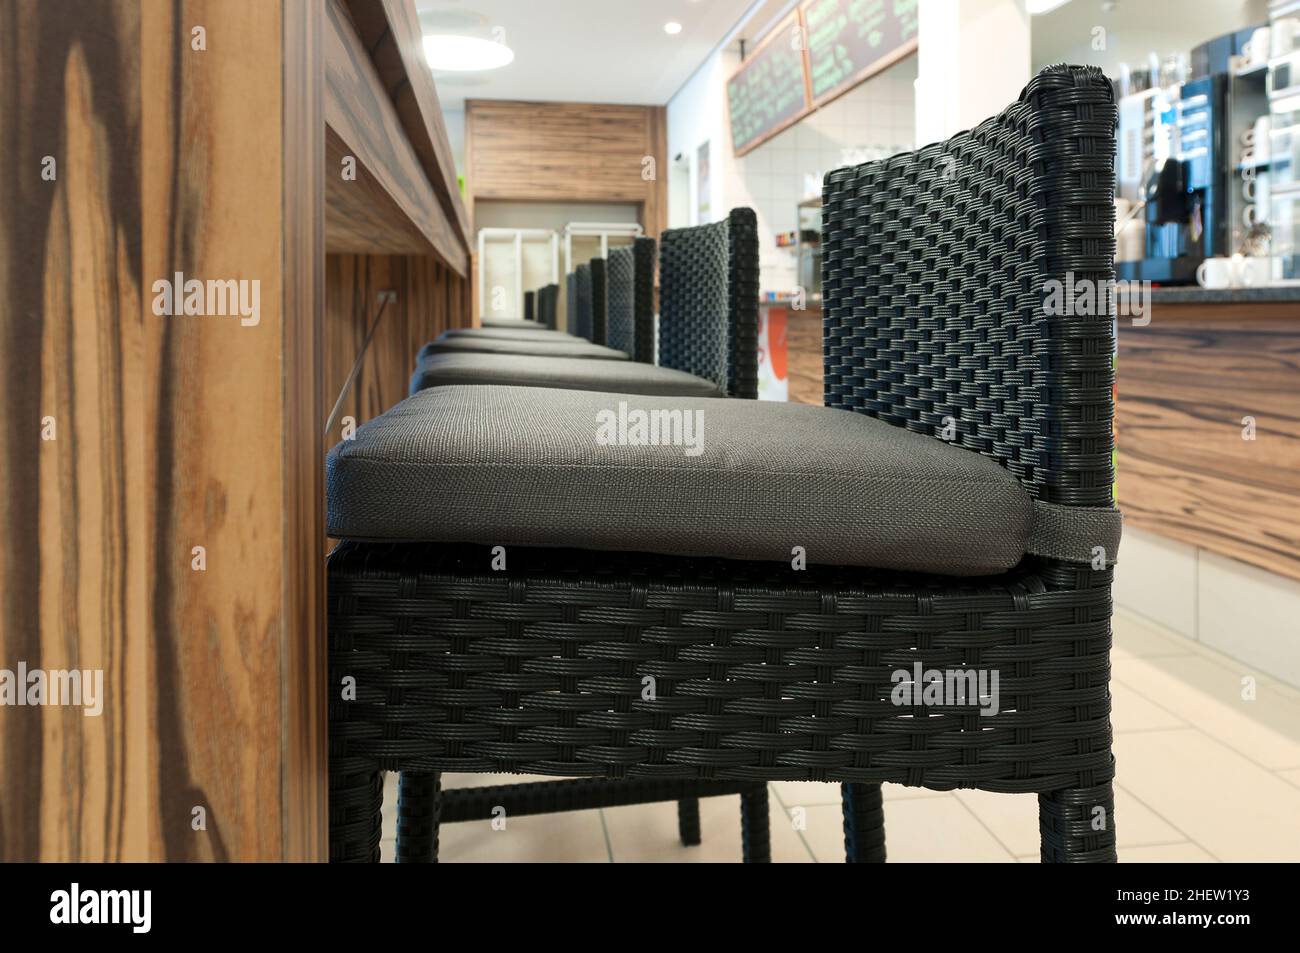 aligned high rattan chairs with  seat-contact surface in front of wooden table in self service restaurant Stock Photo